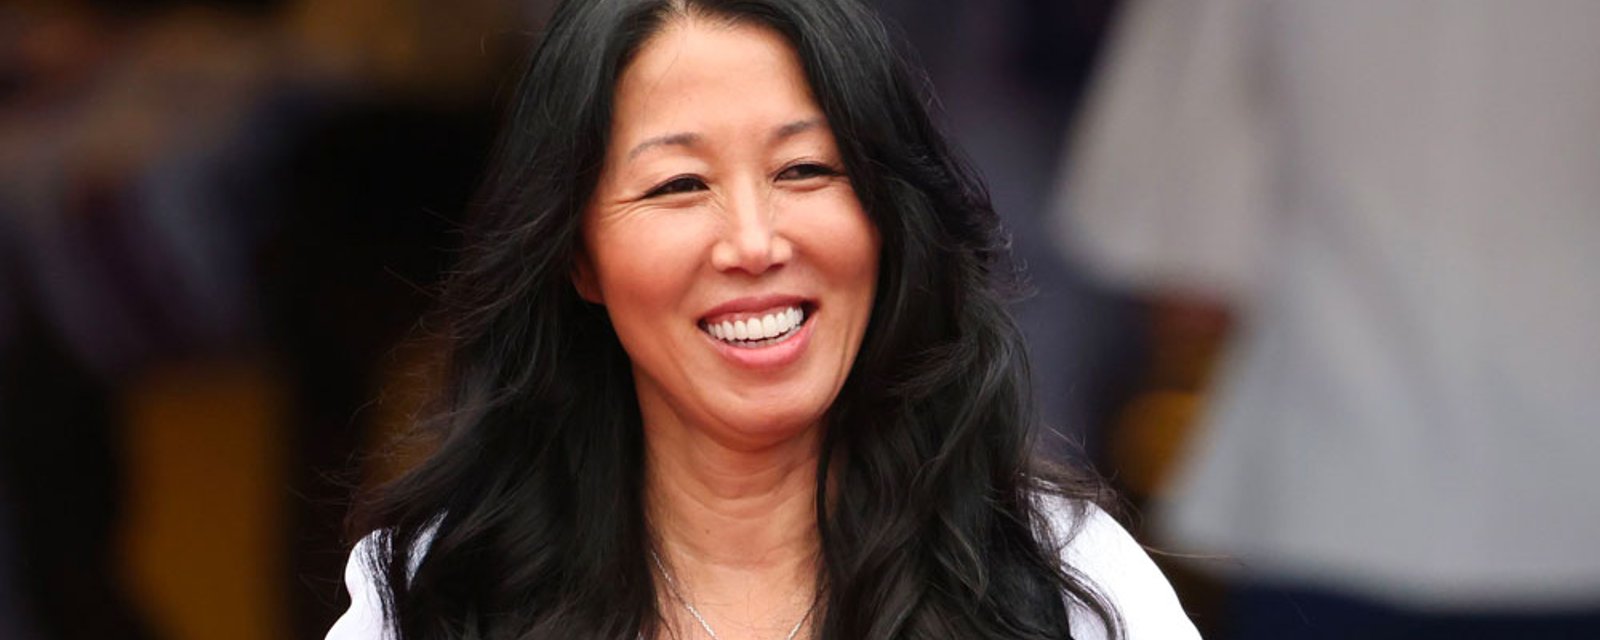 Sabres owner Kim Pegula makes first public appearance in over a year